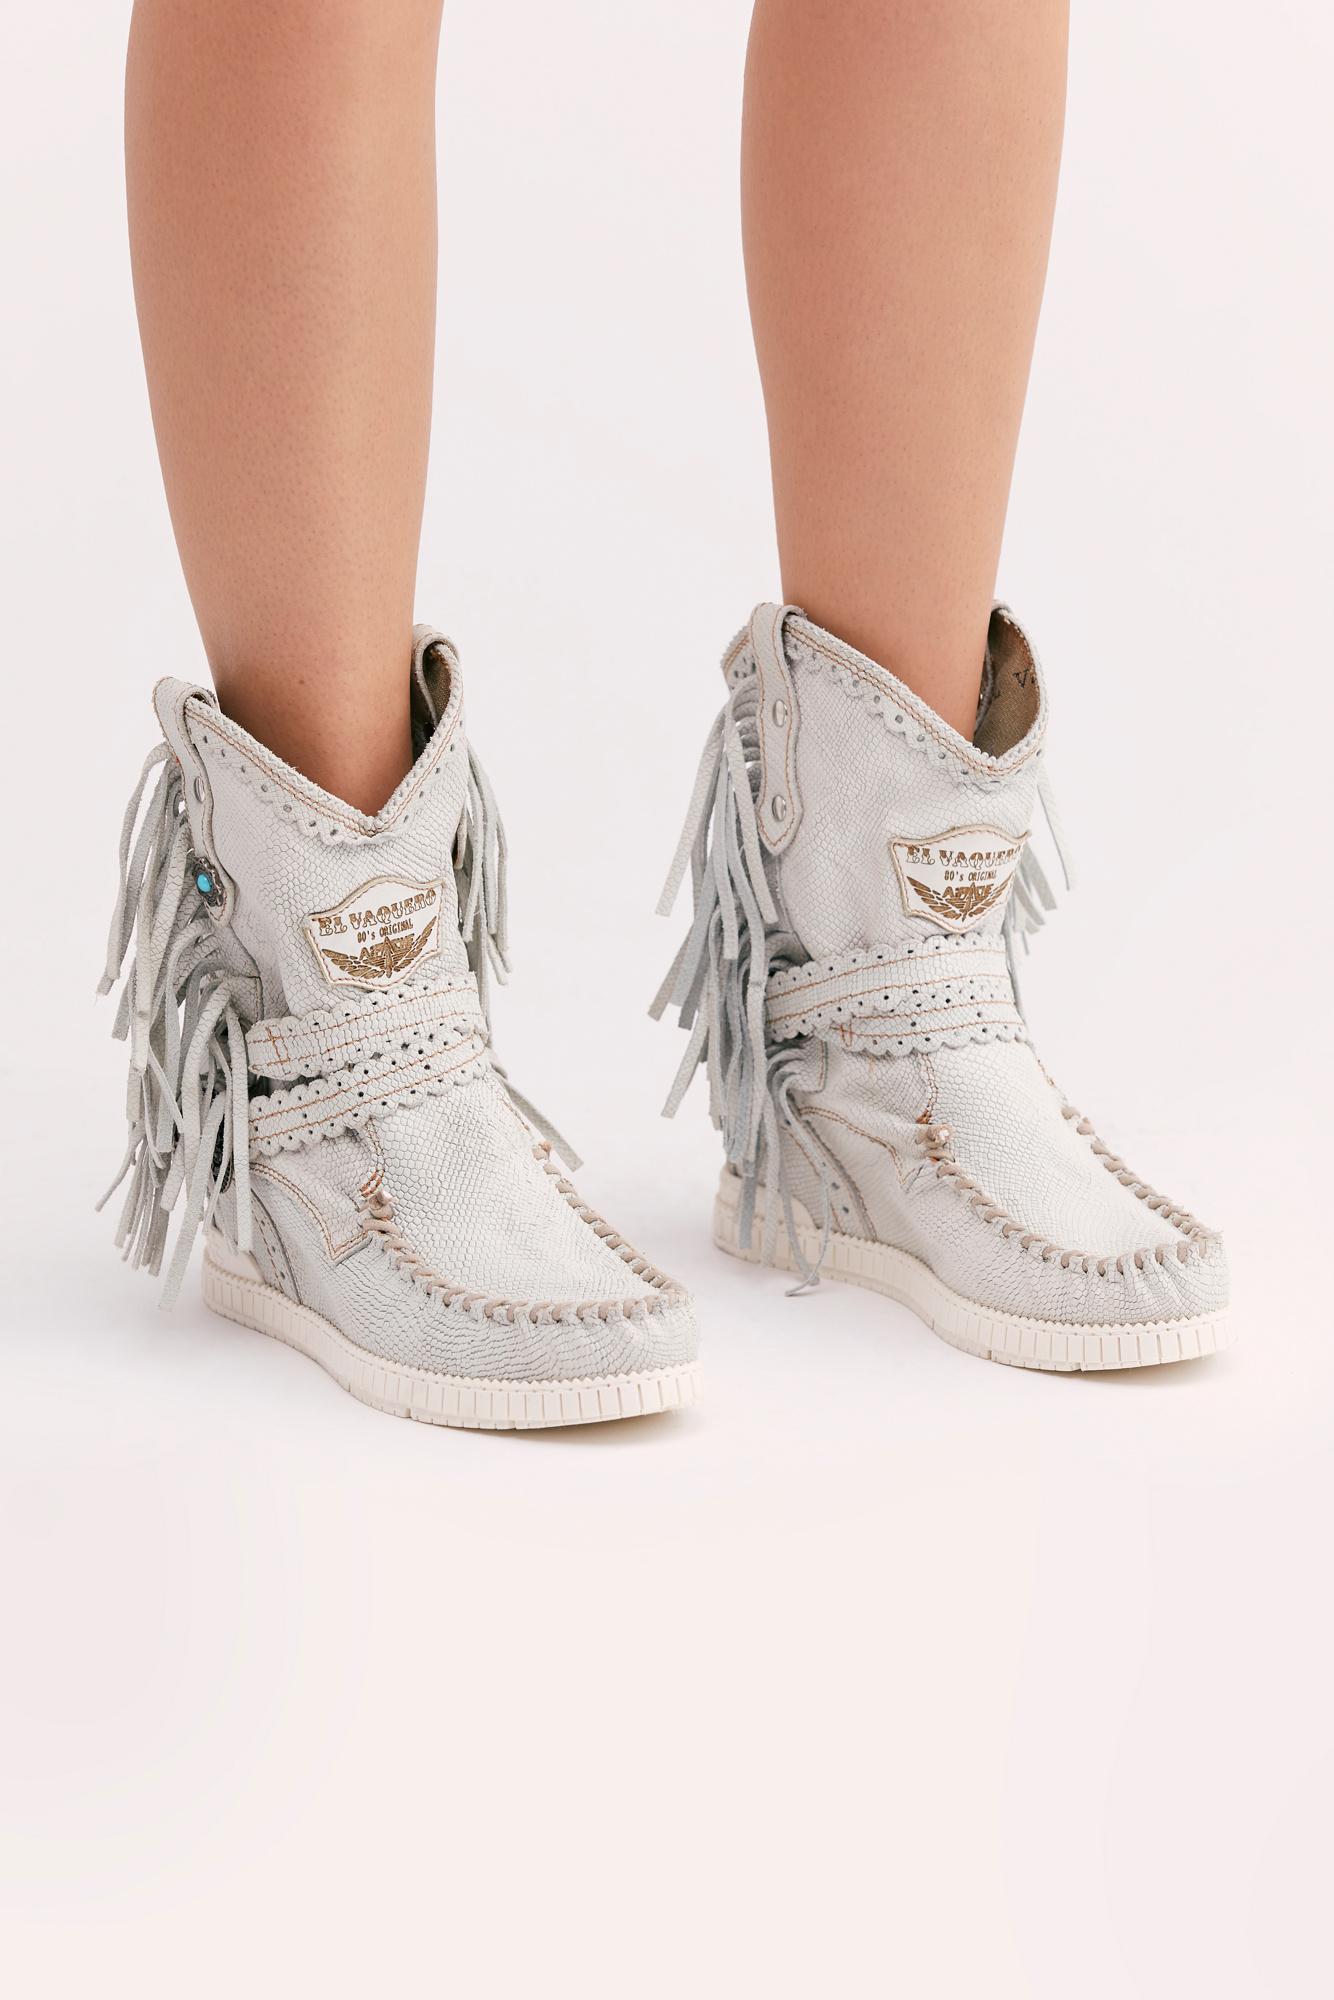 Free People Leather Arya Mocc Boot By El Vaquero in White - Lyst